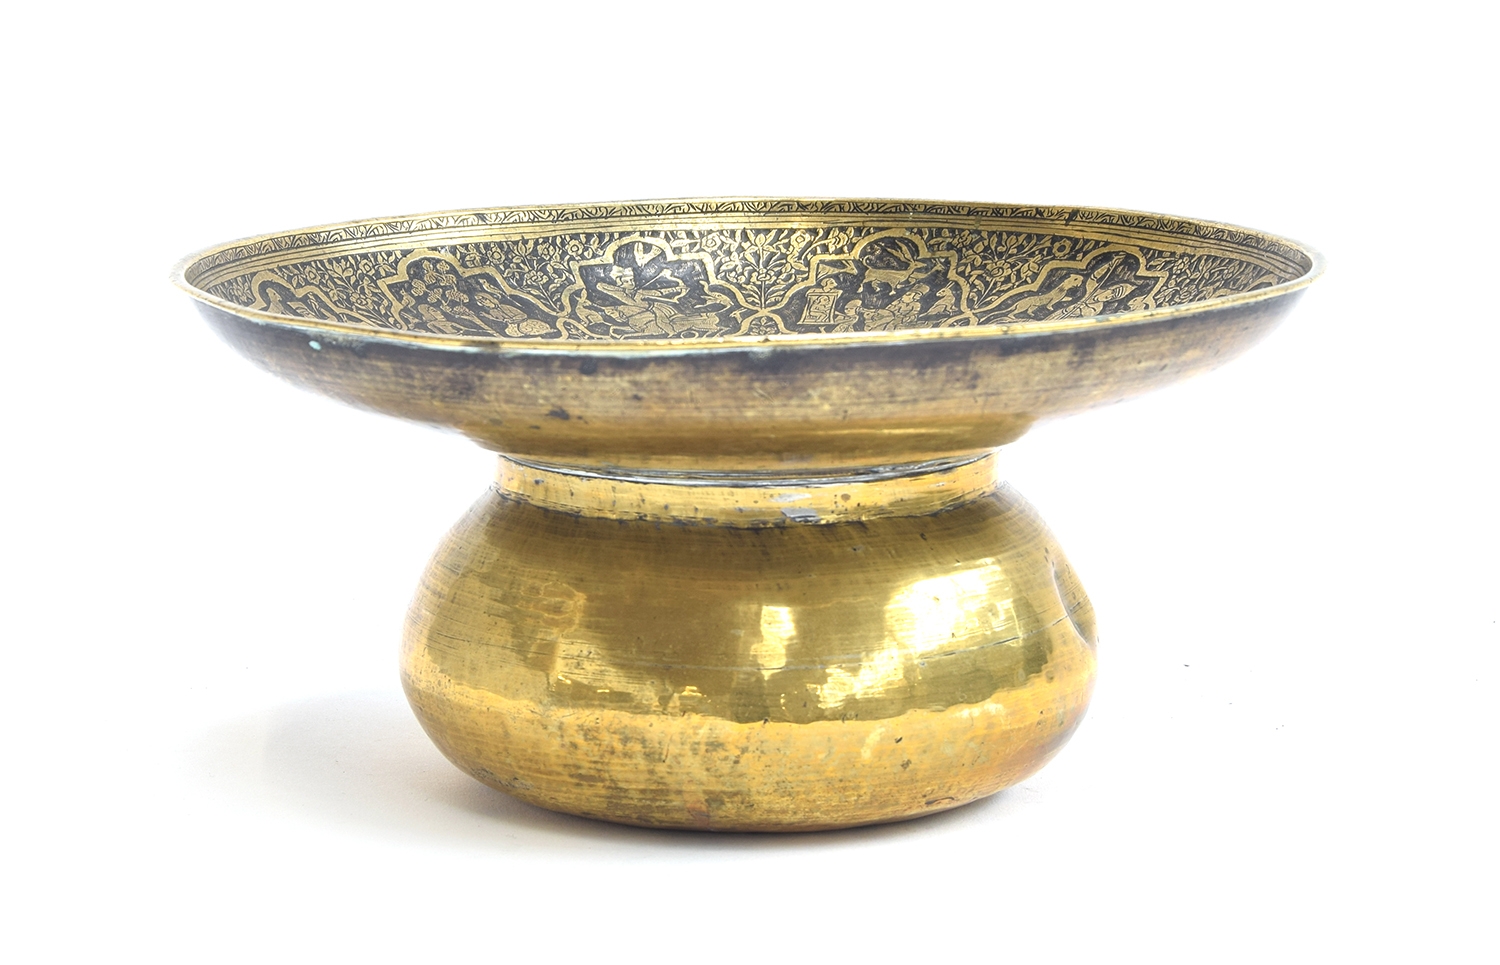 A 19th century Islamic Qajar engraved brass spittoon, the engraved panels depicting various hunts